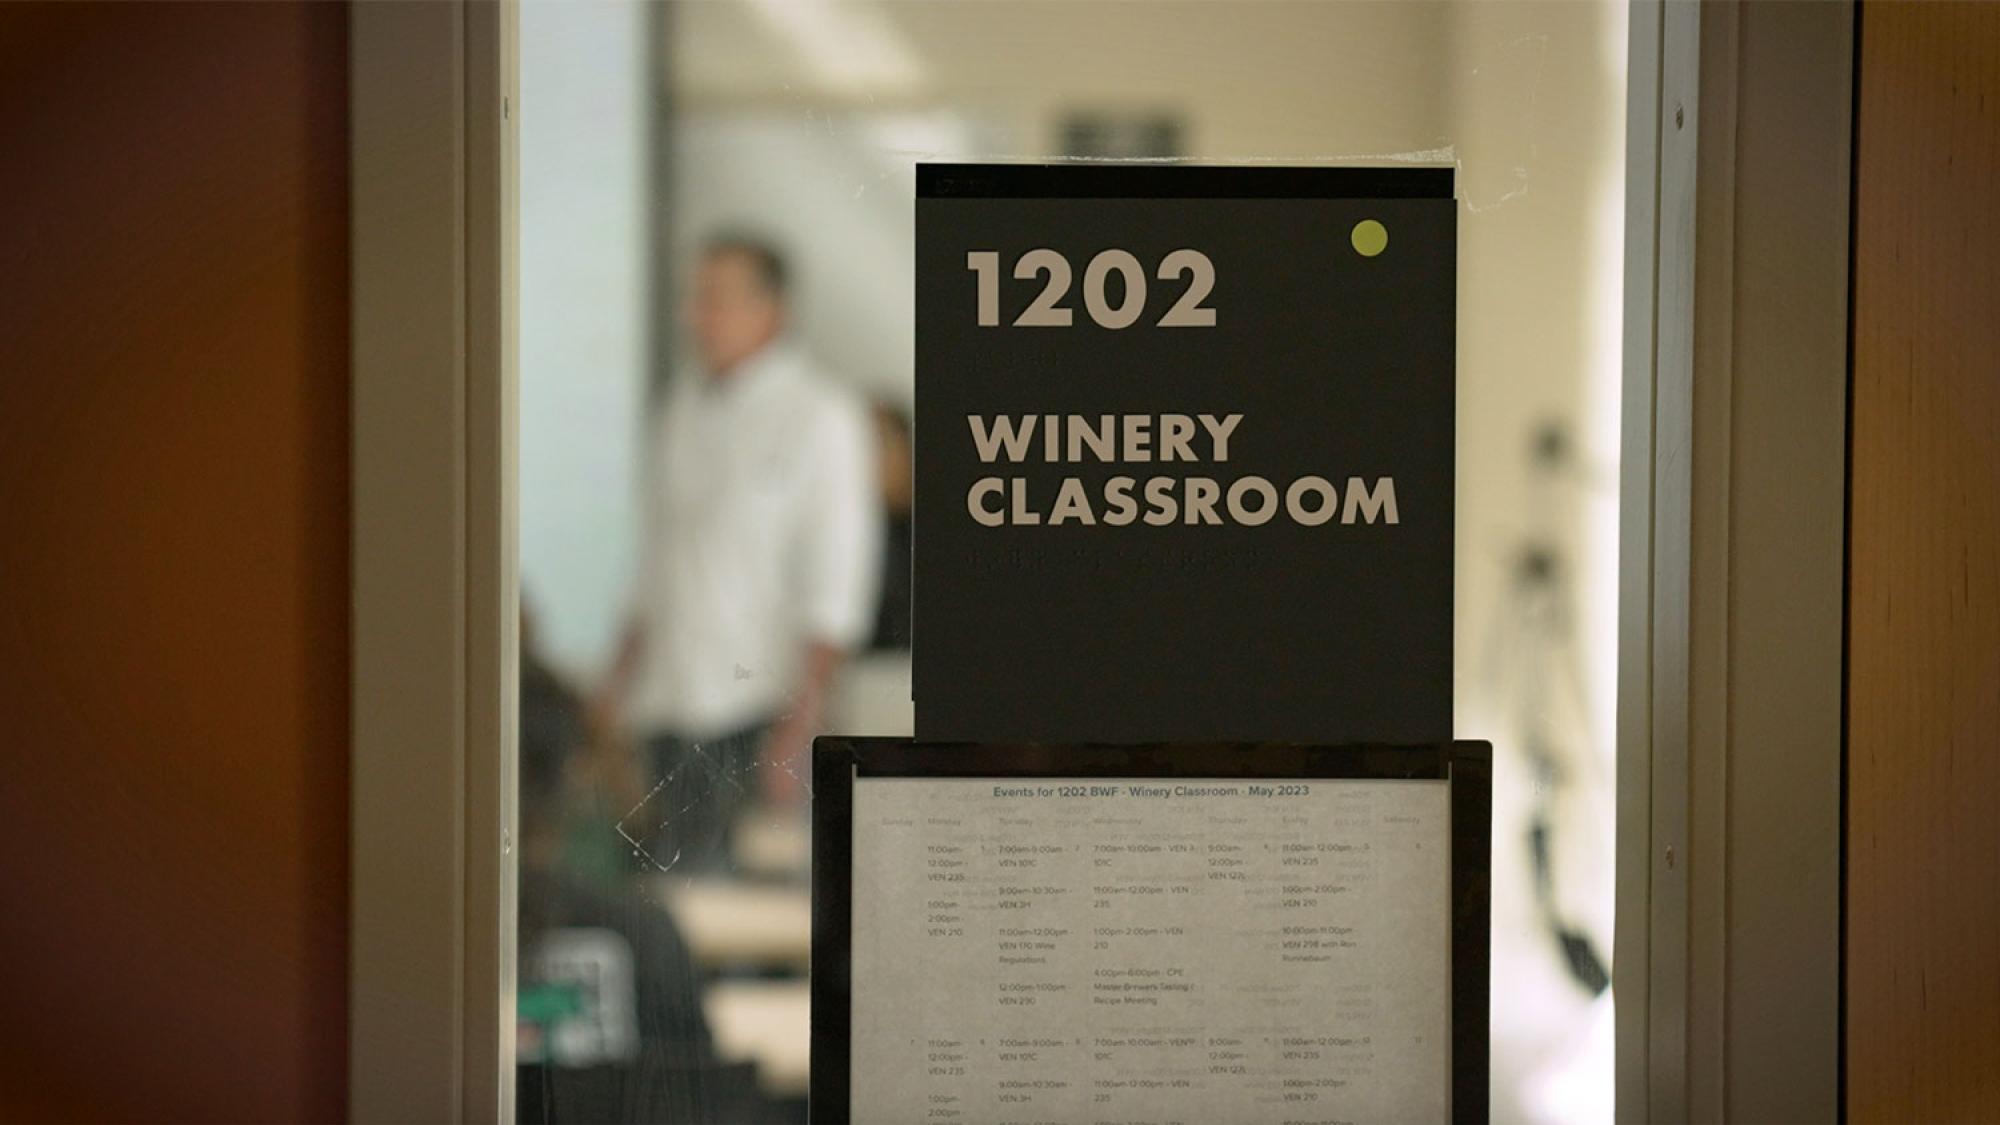 Close shot of a classroom door. The sign reads: "1202 Winery Classroom."